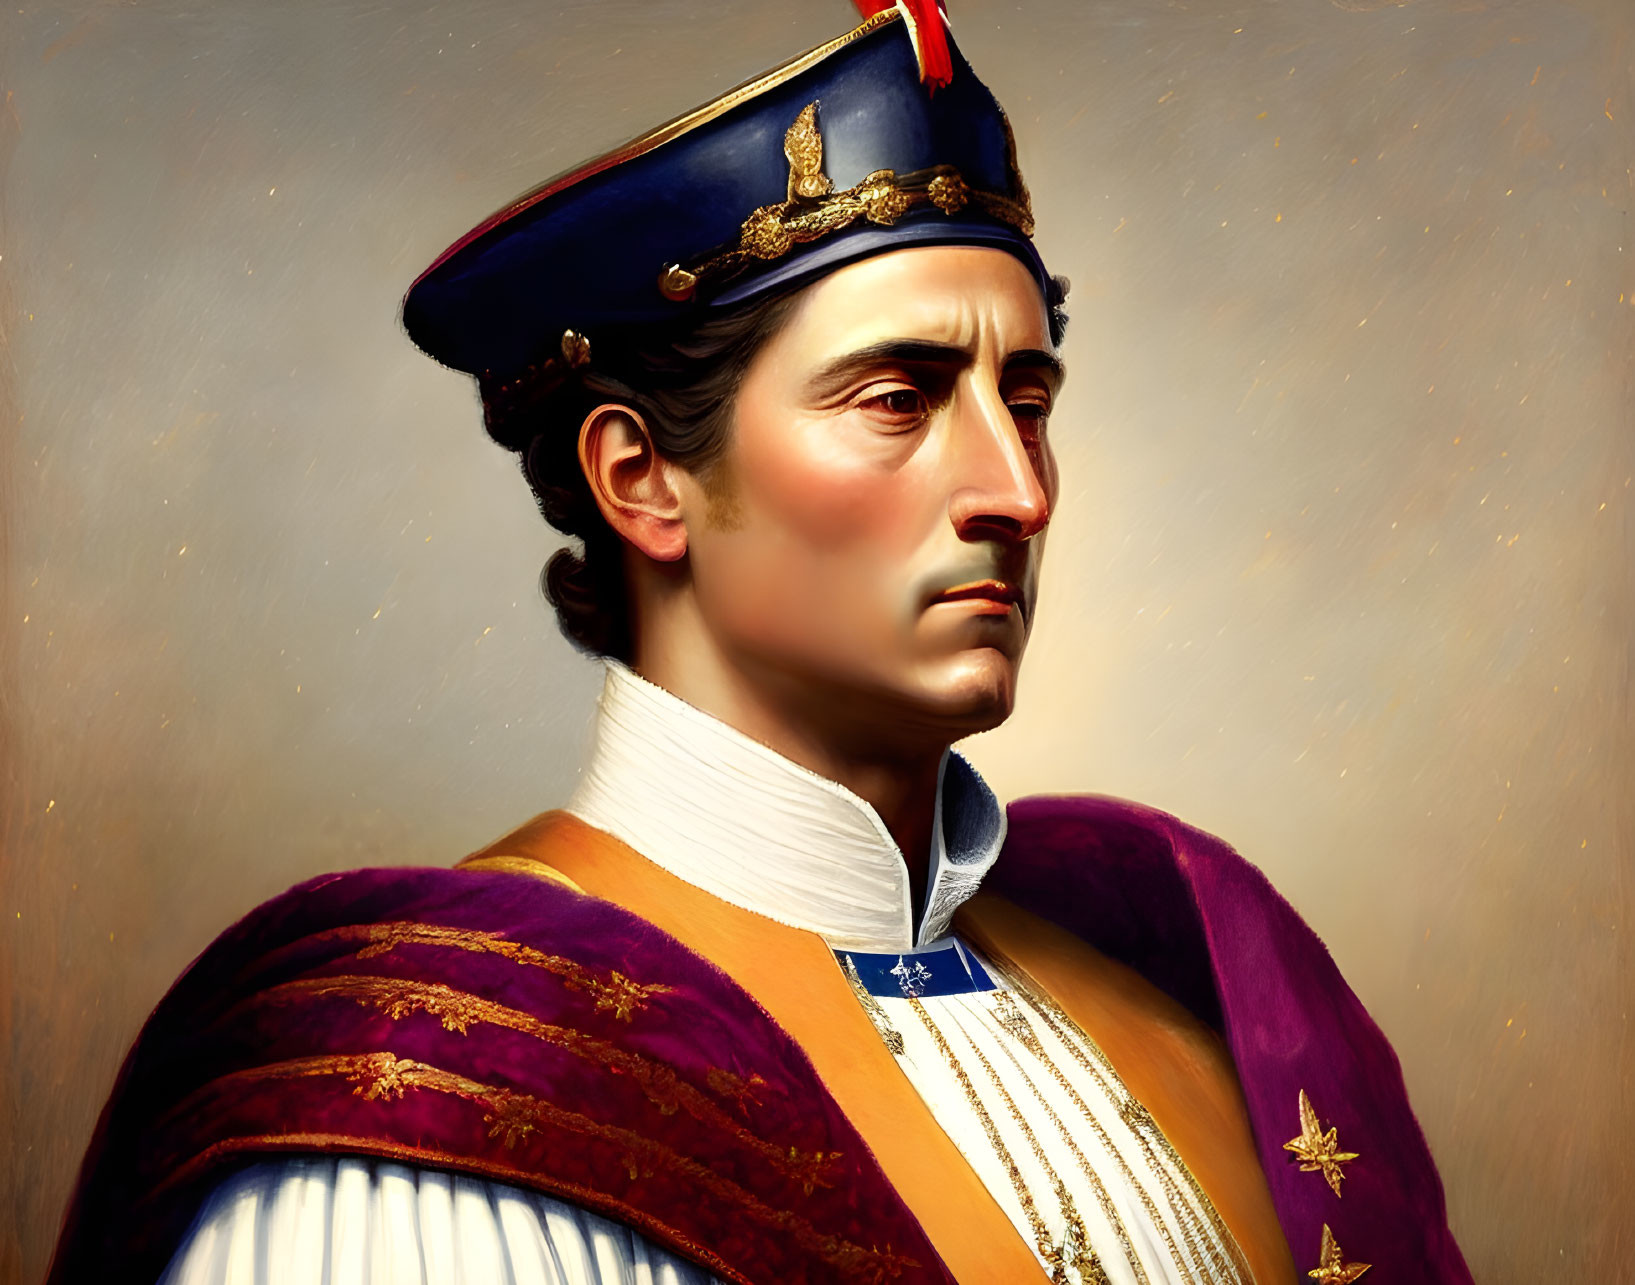 Historical military figure portrait in blue and gold hat with purple cloak and stern expression